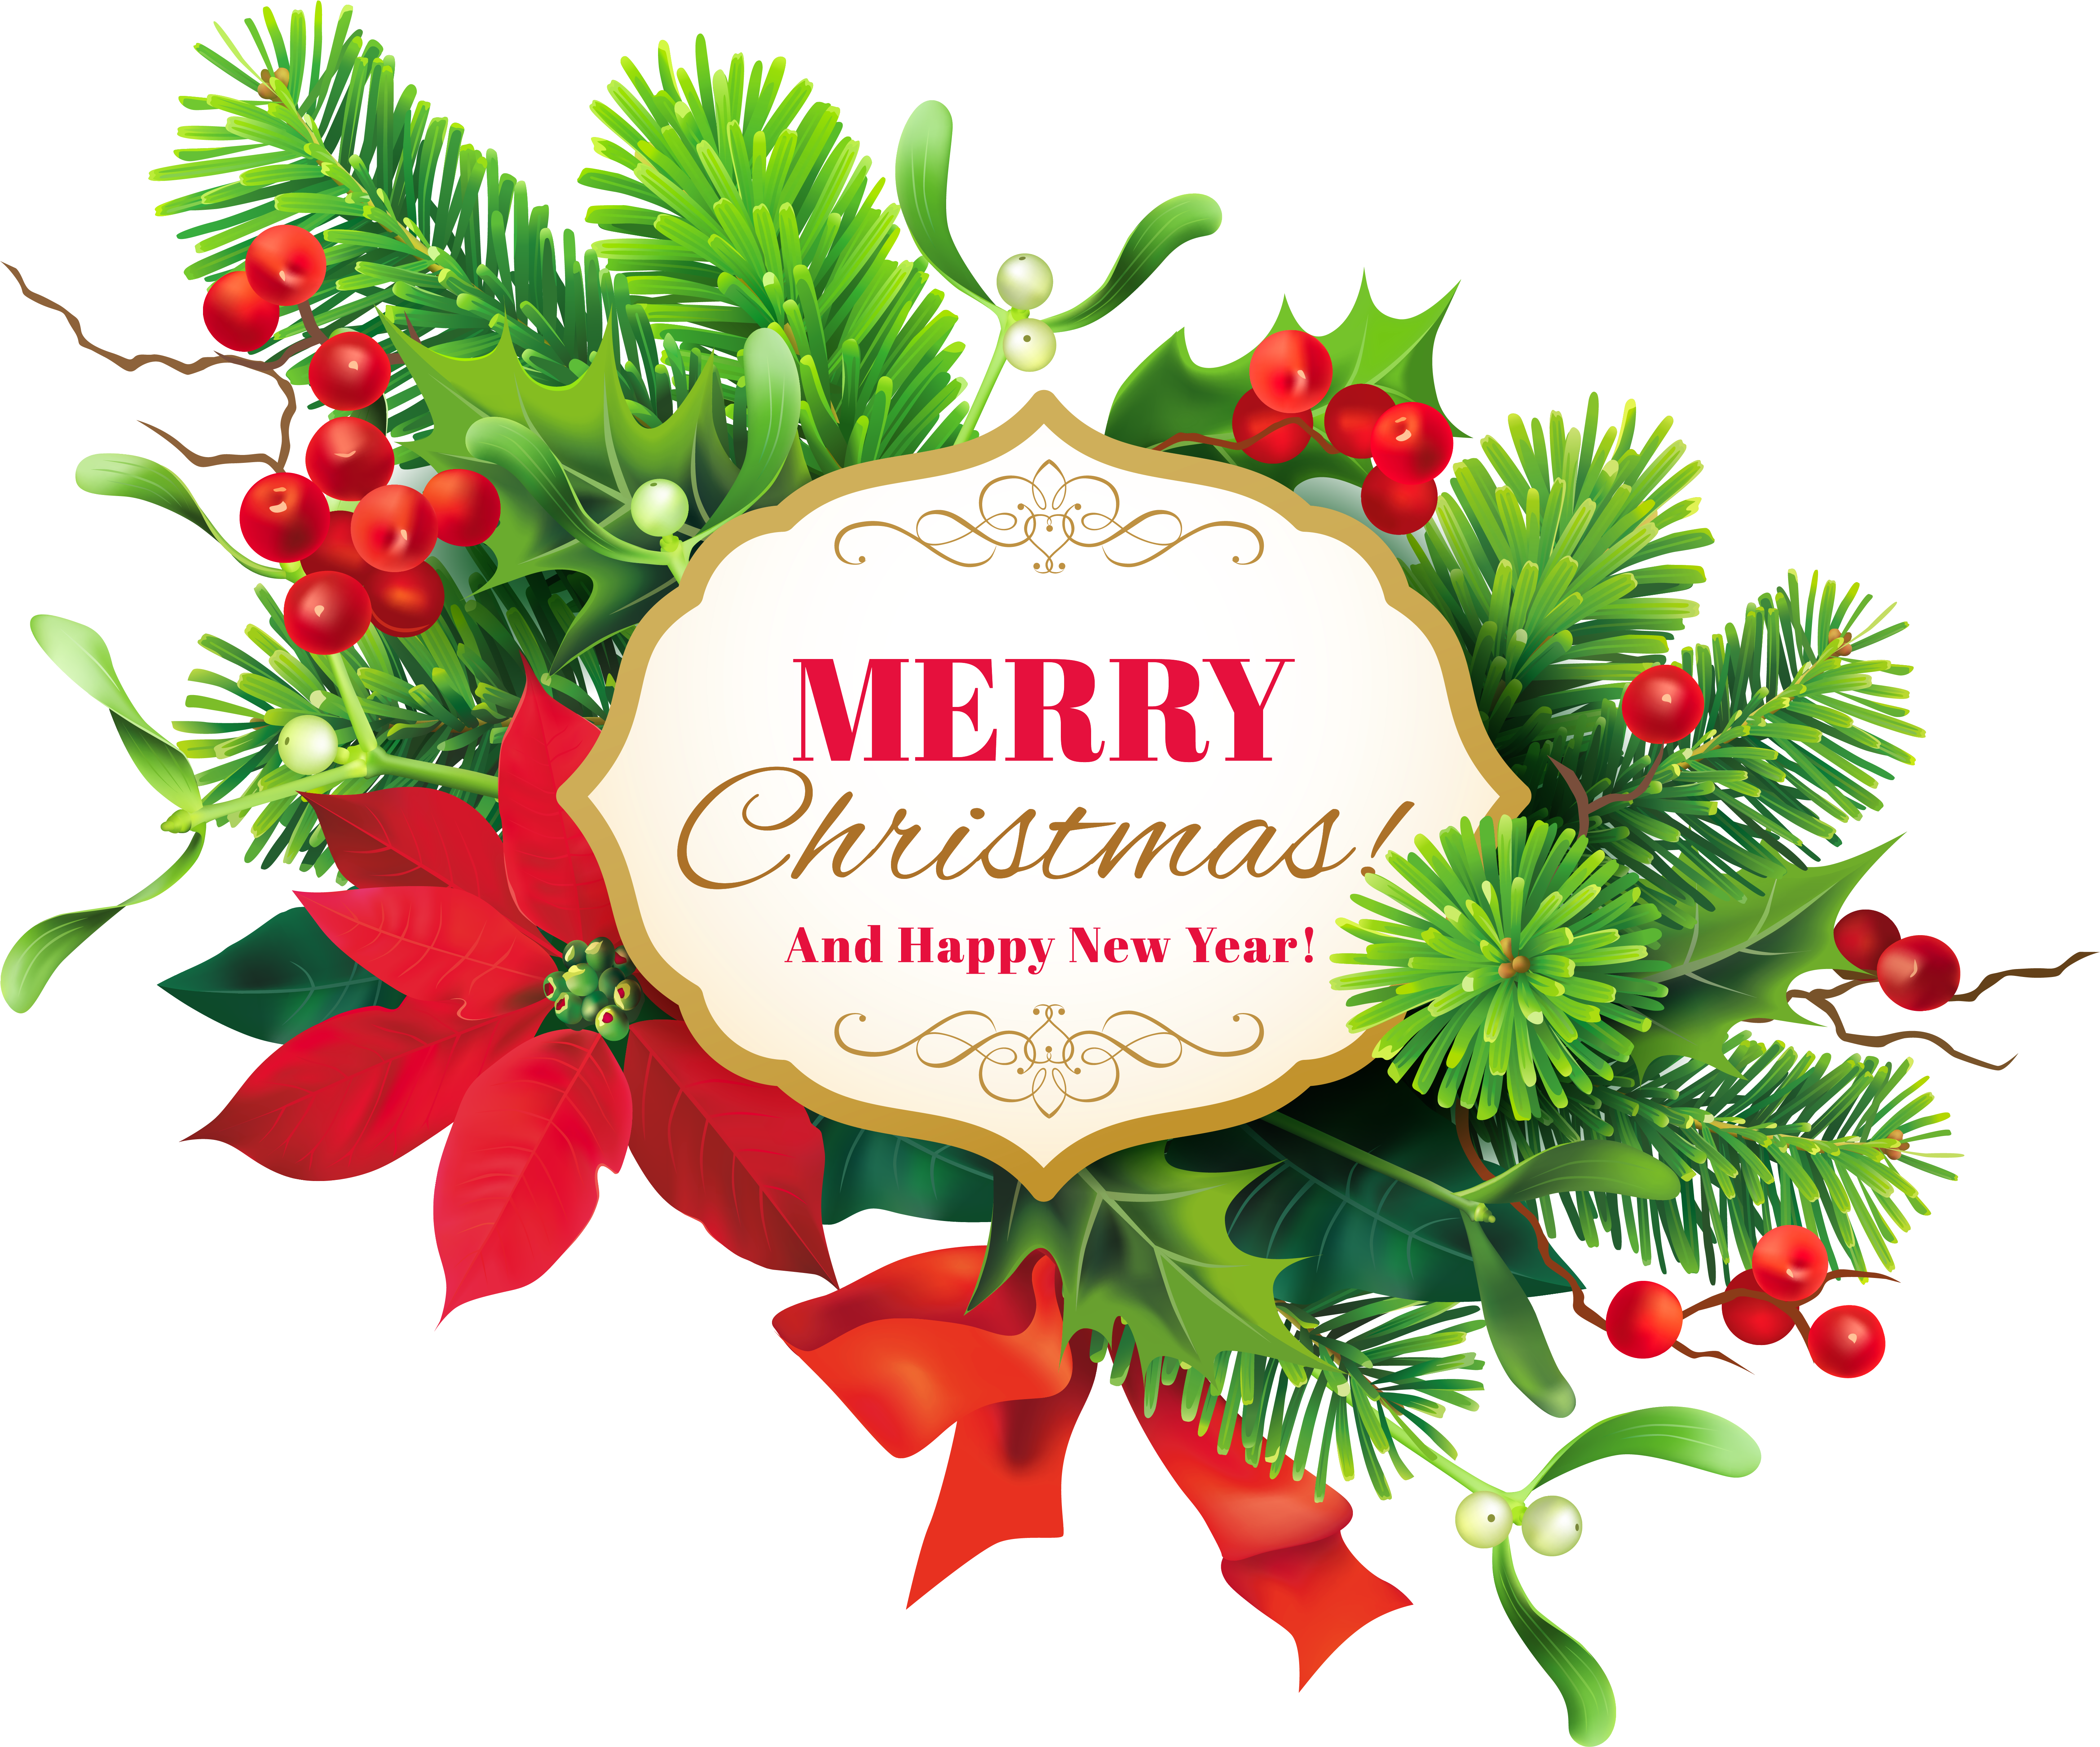 A Christmas Card With Red Berries And Green Leaves